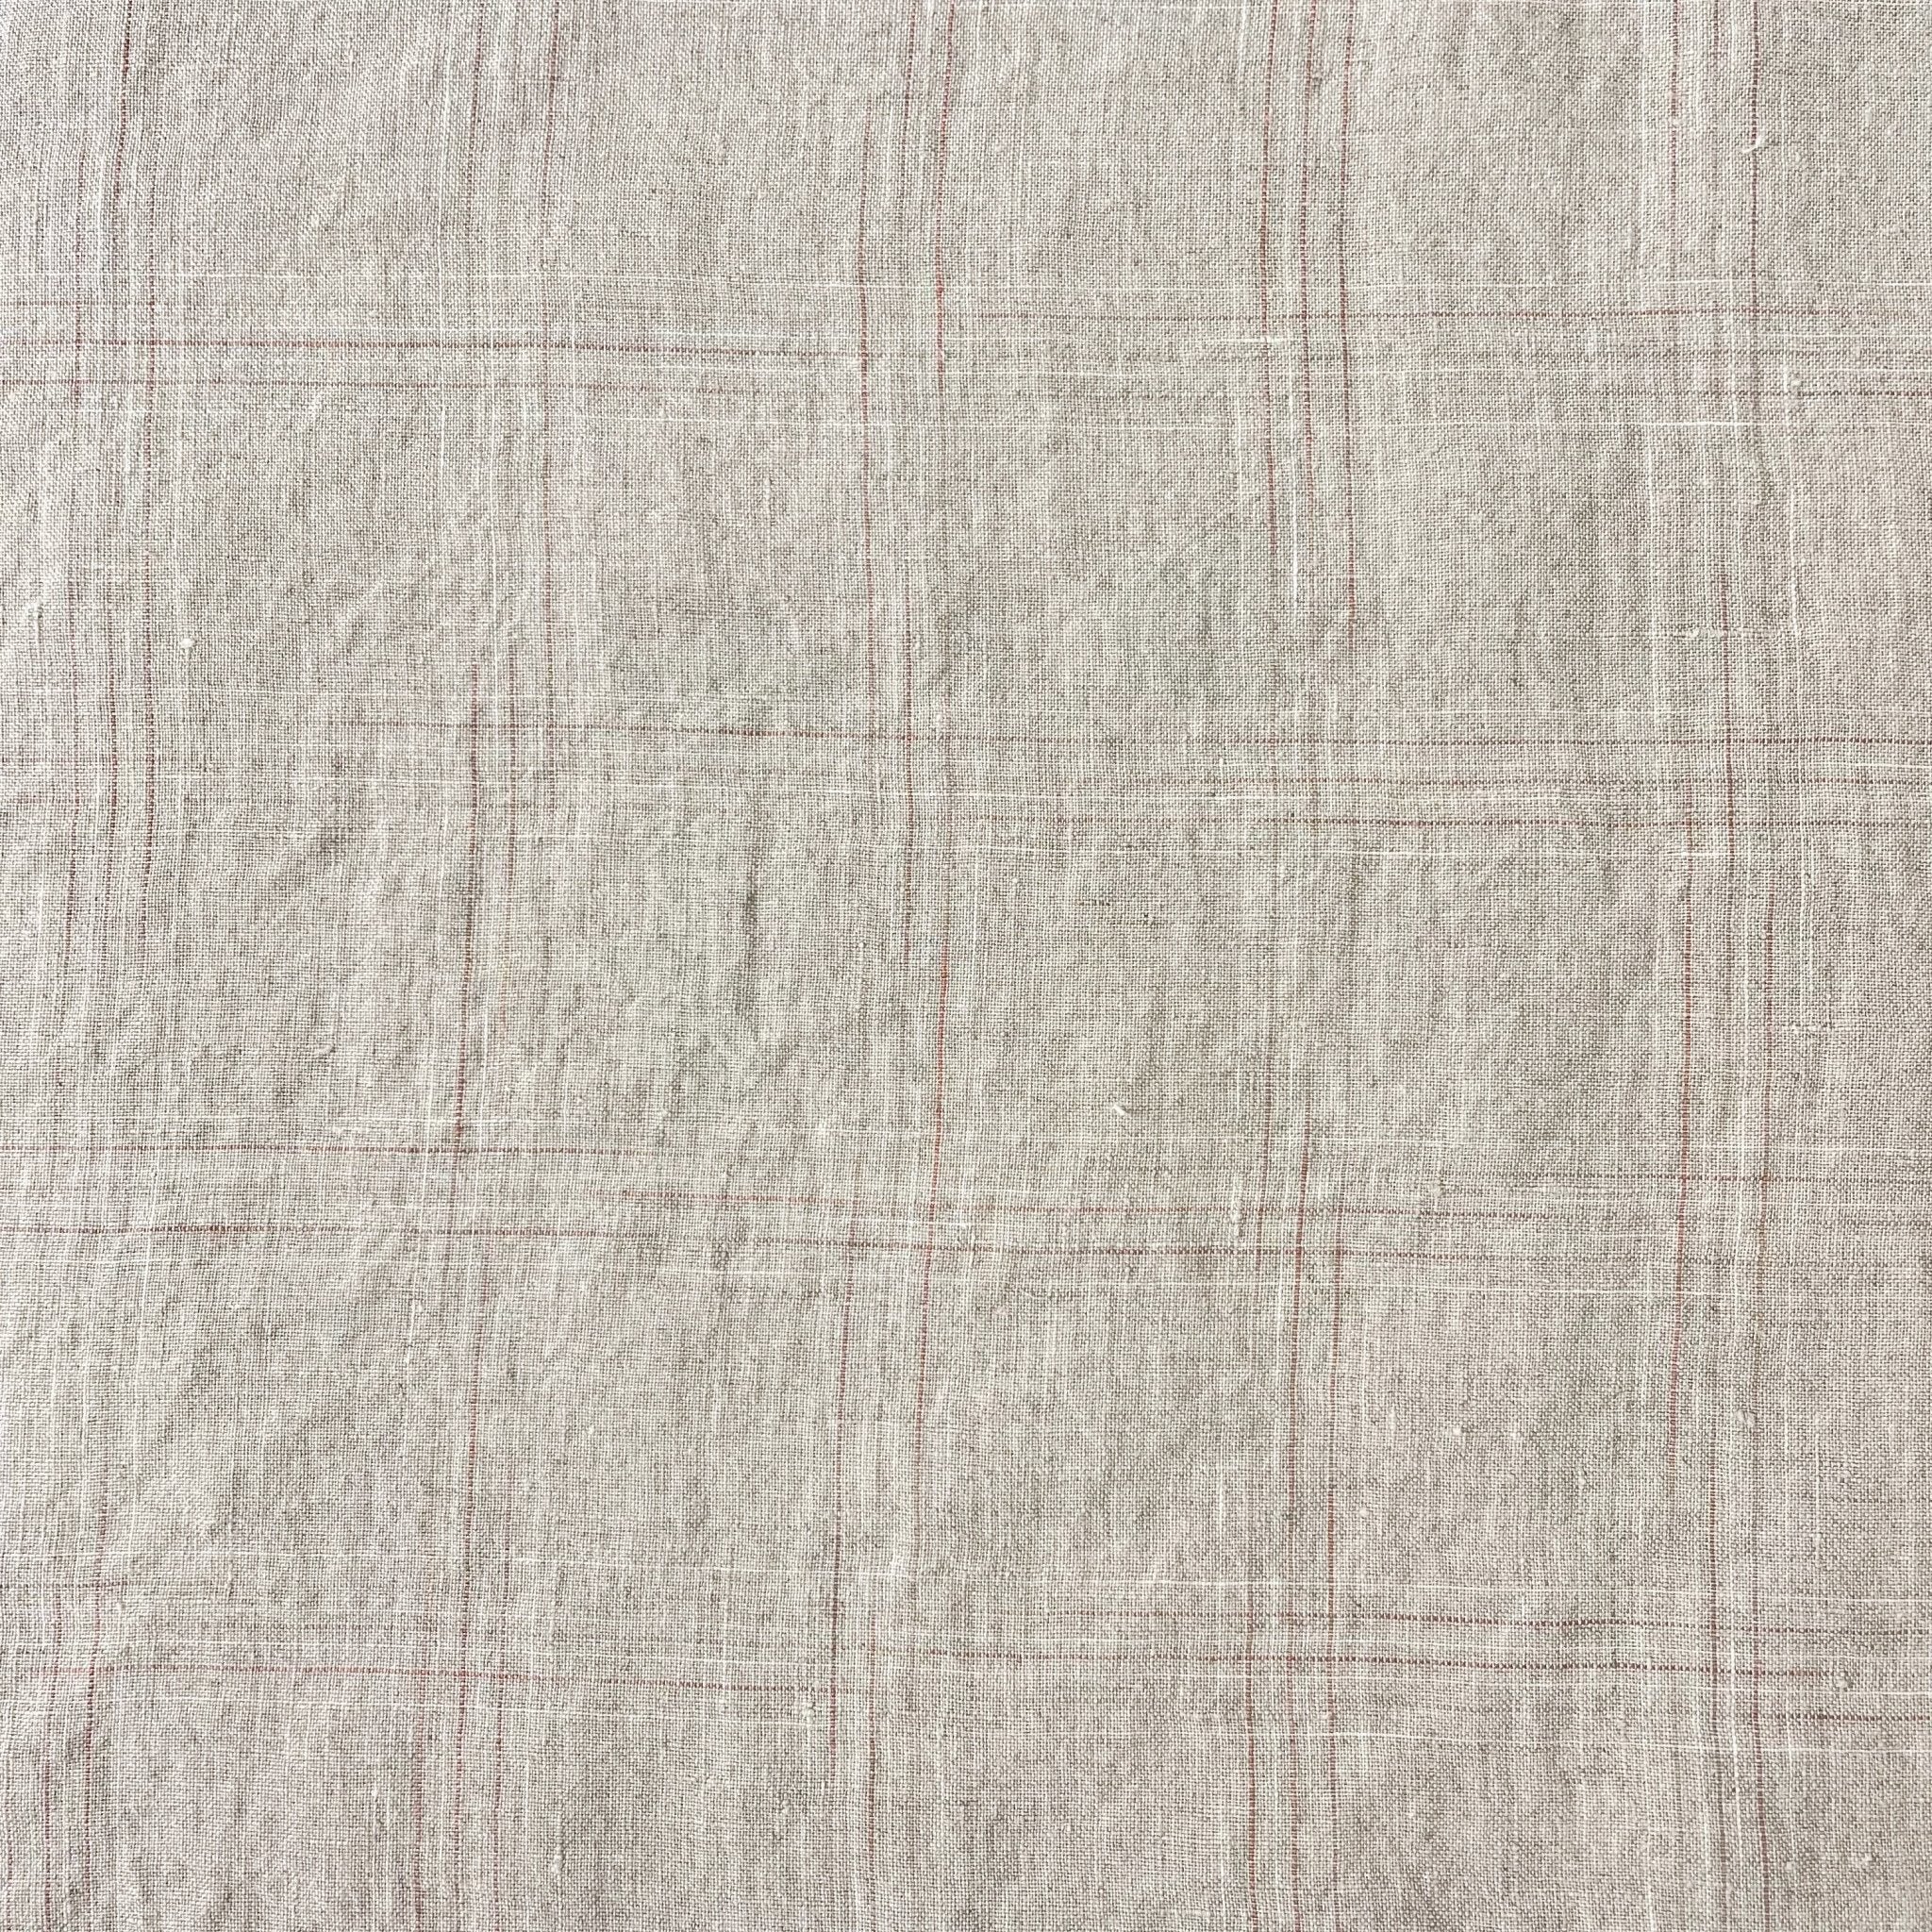 Linen Spaced Dyed Check Fabric 7347 - The Linen Lab - 7347 NATURAL